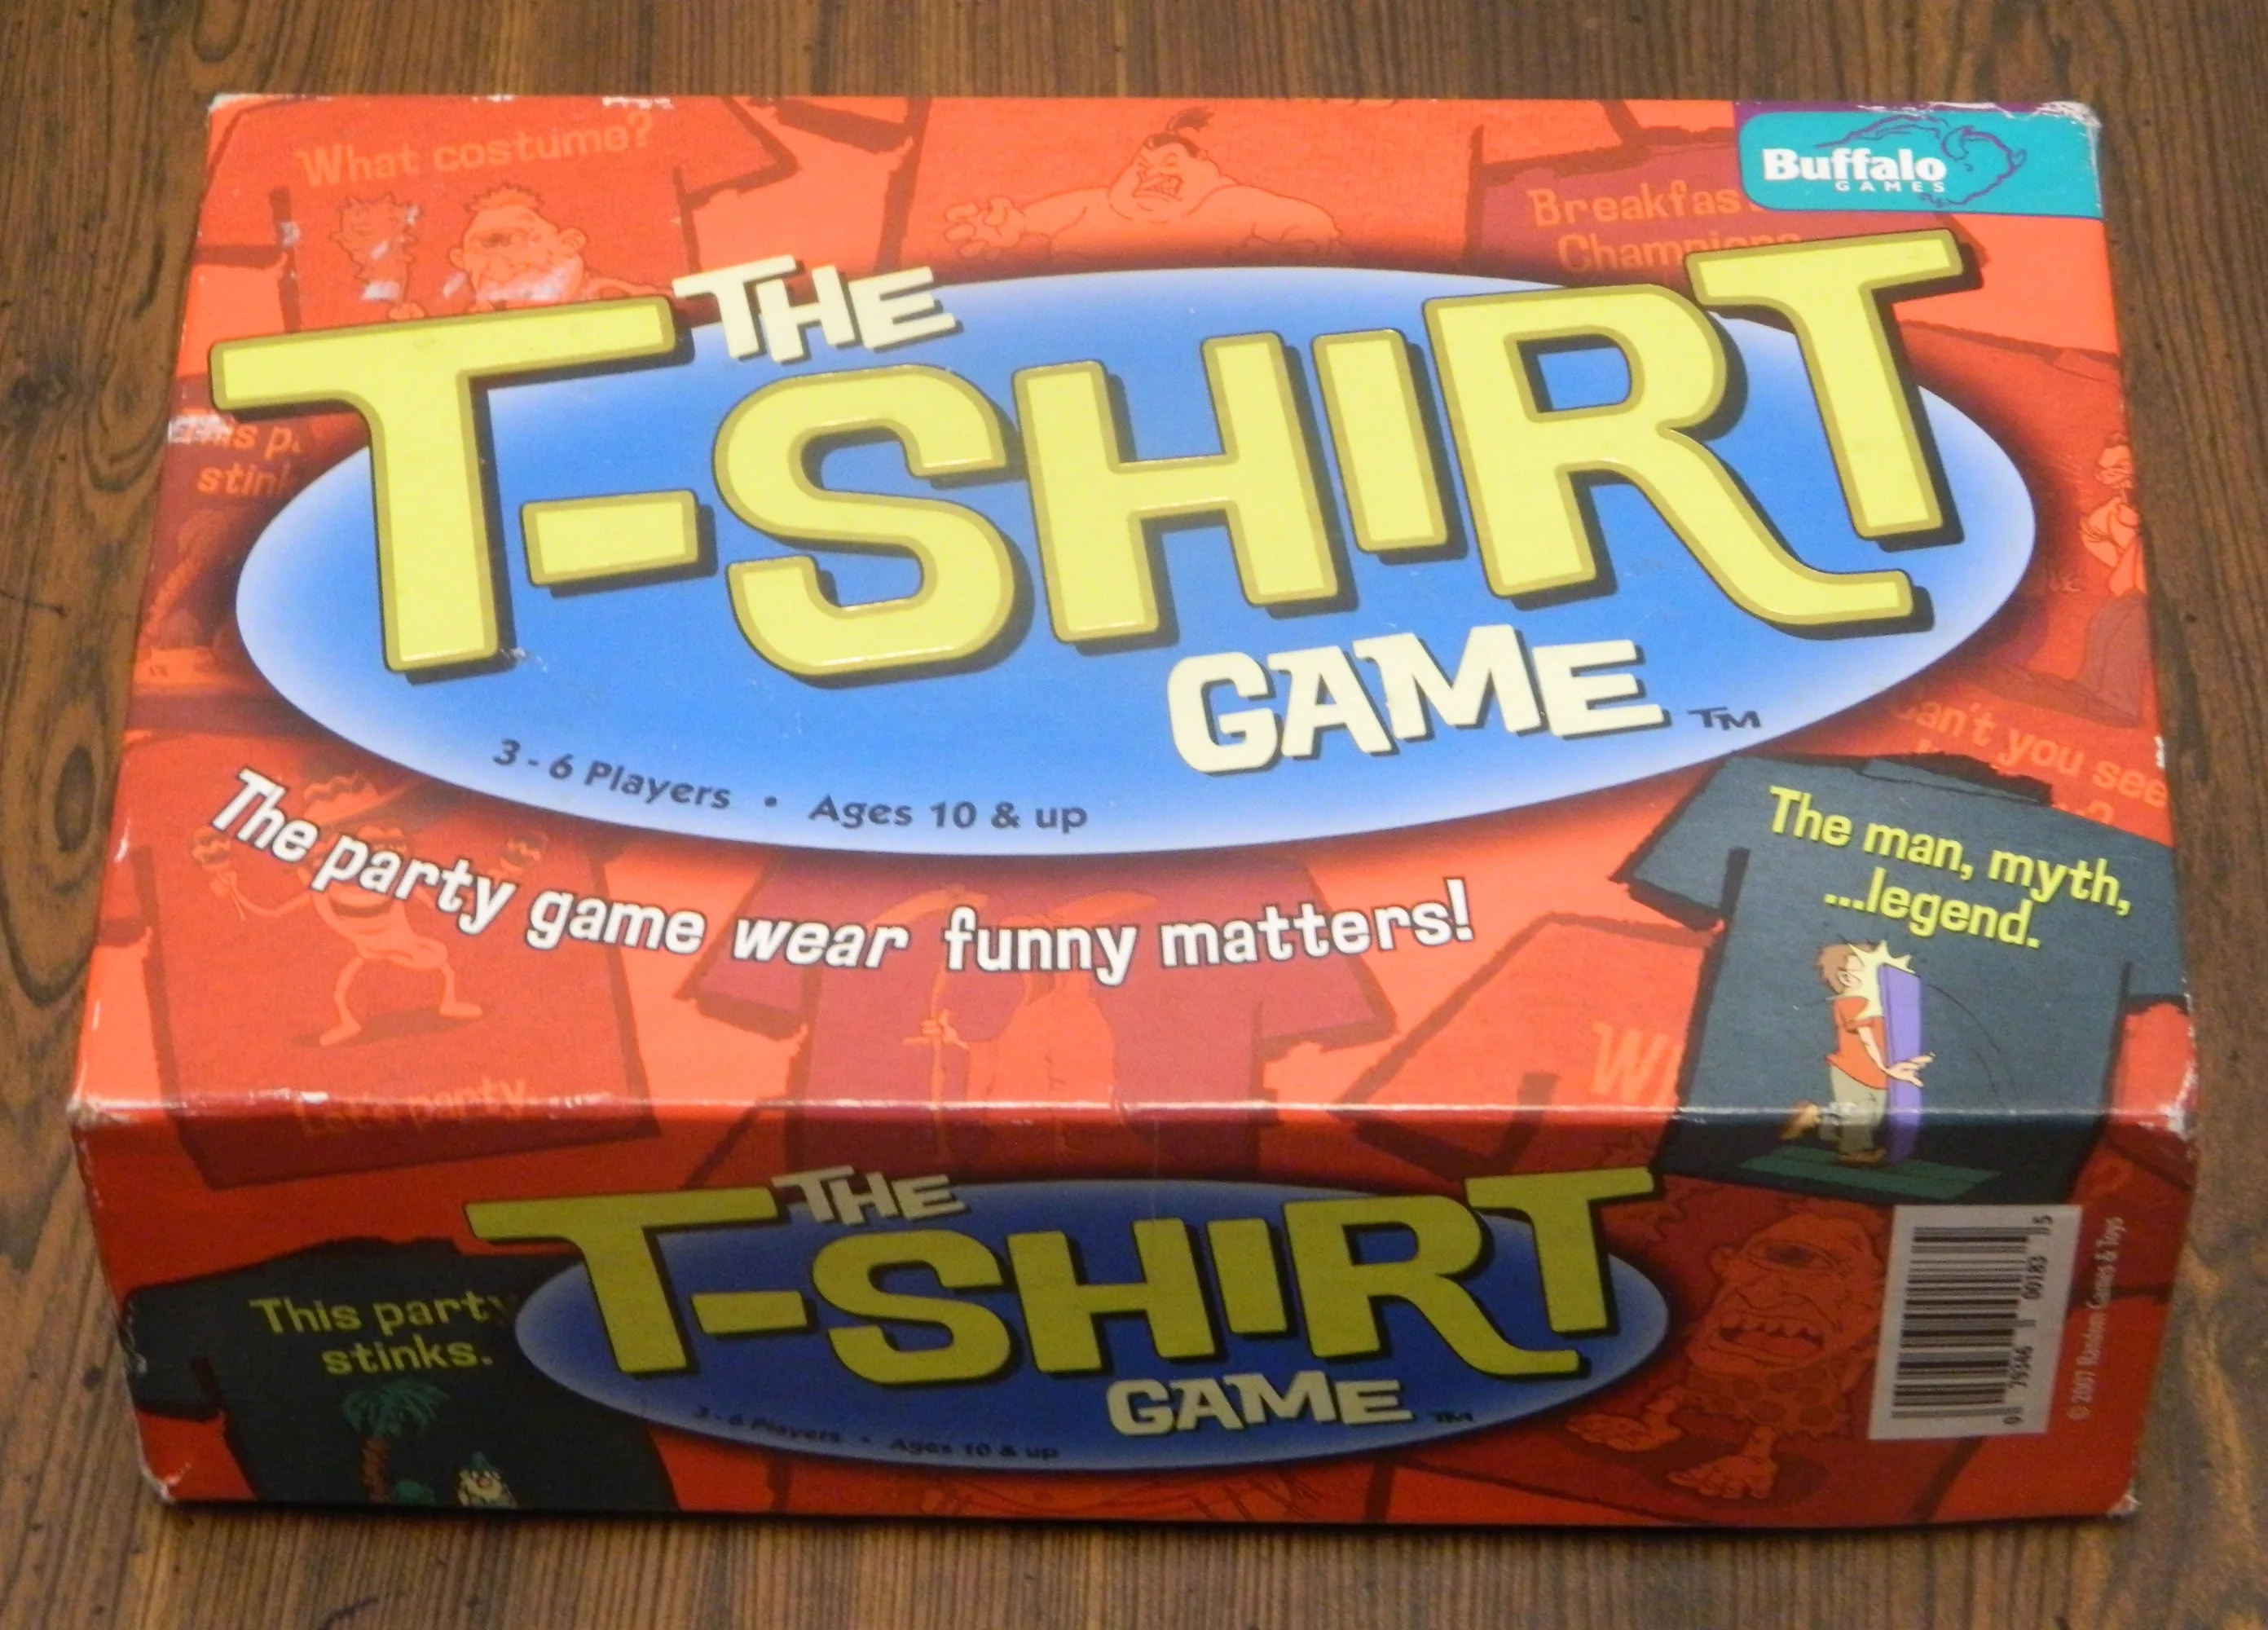 The T-Shirt Game Party Game Box